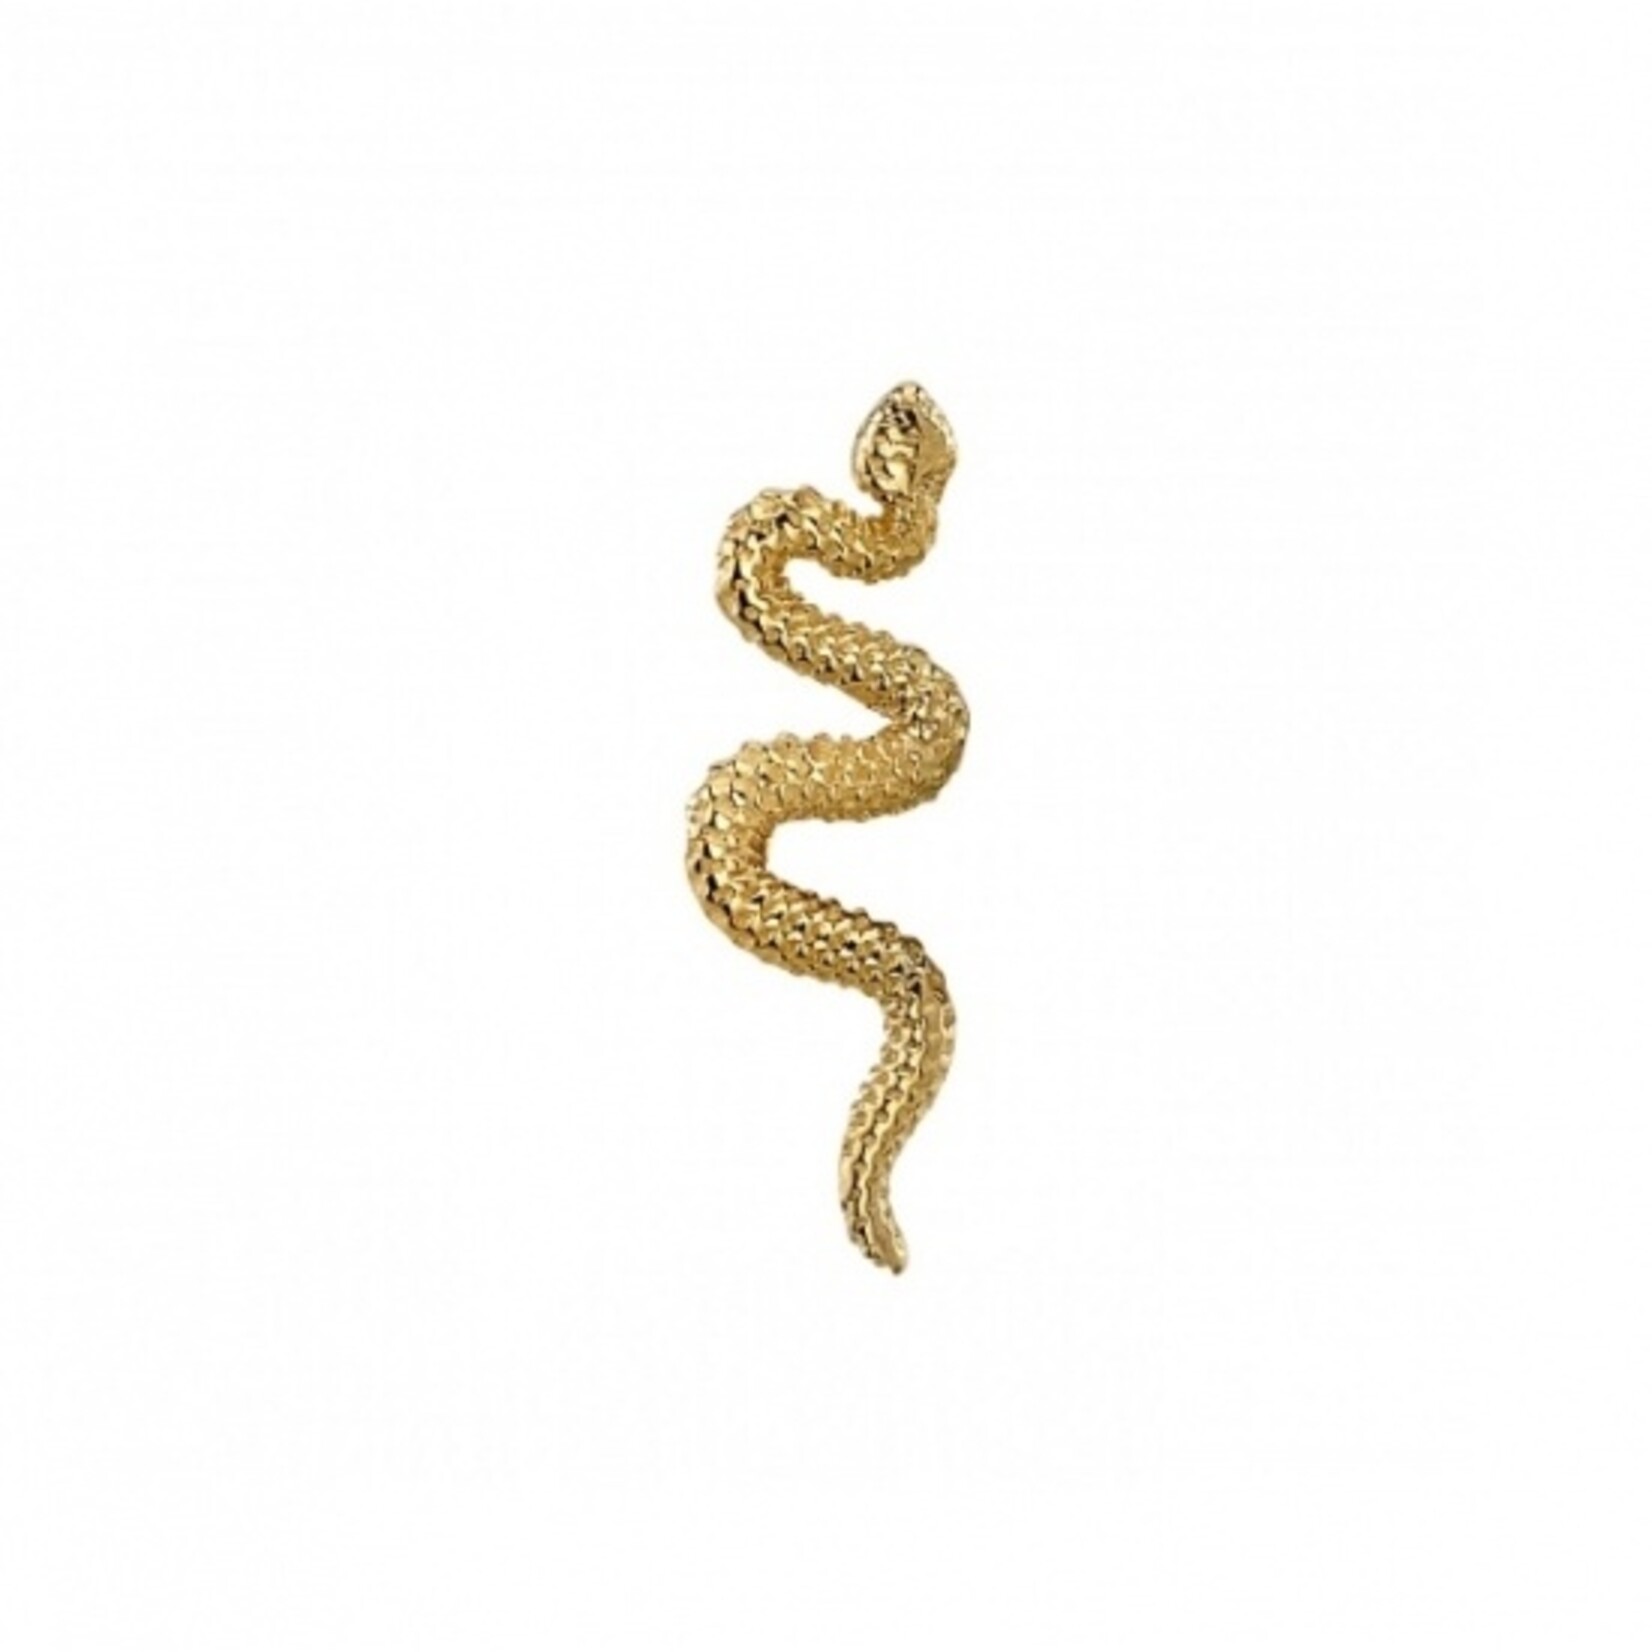 BVLA BVLA "Delicate Snake" threaded end